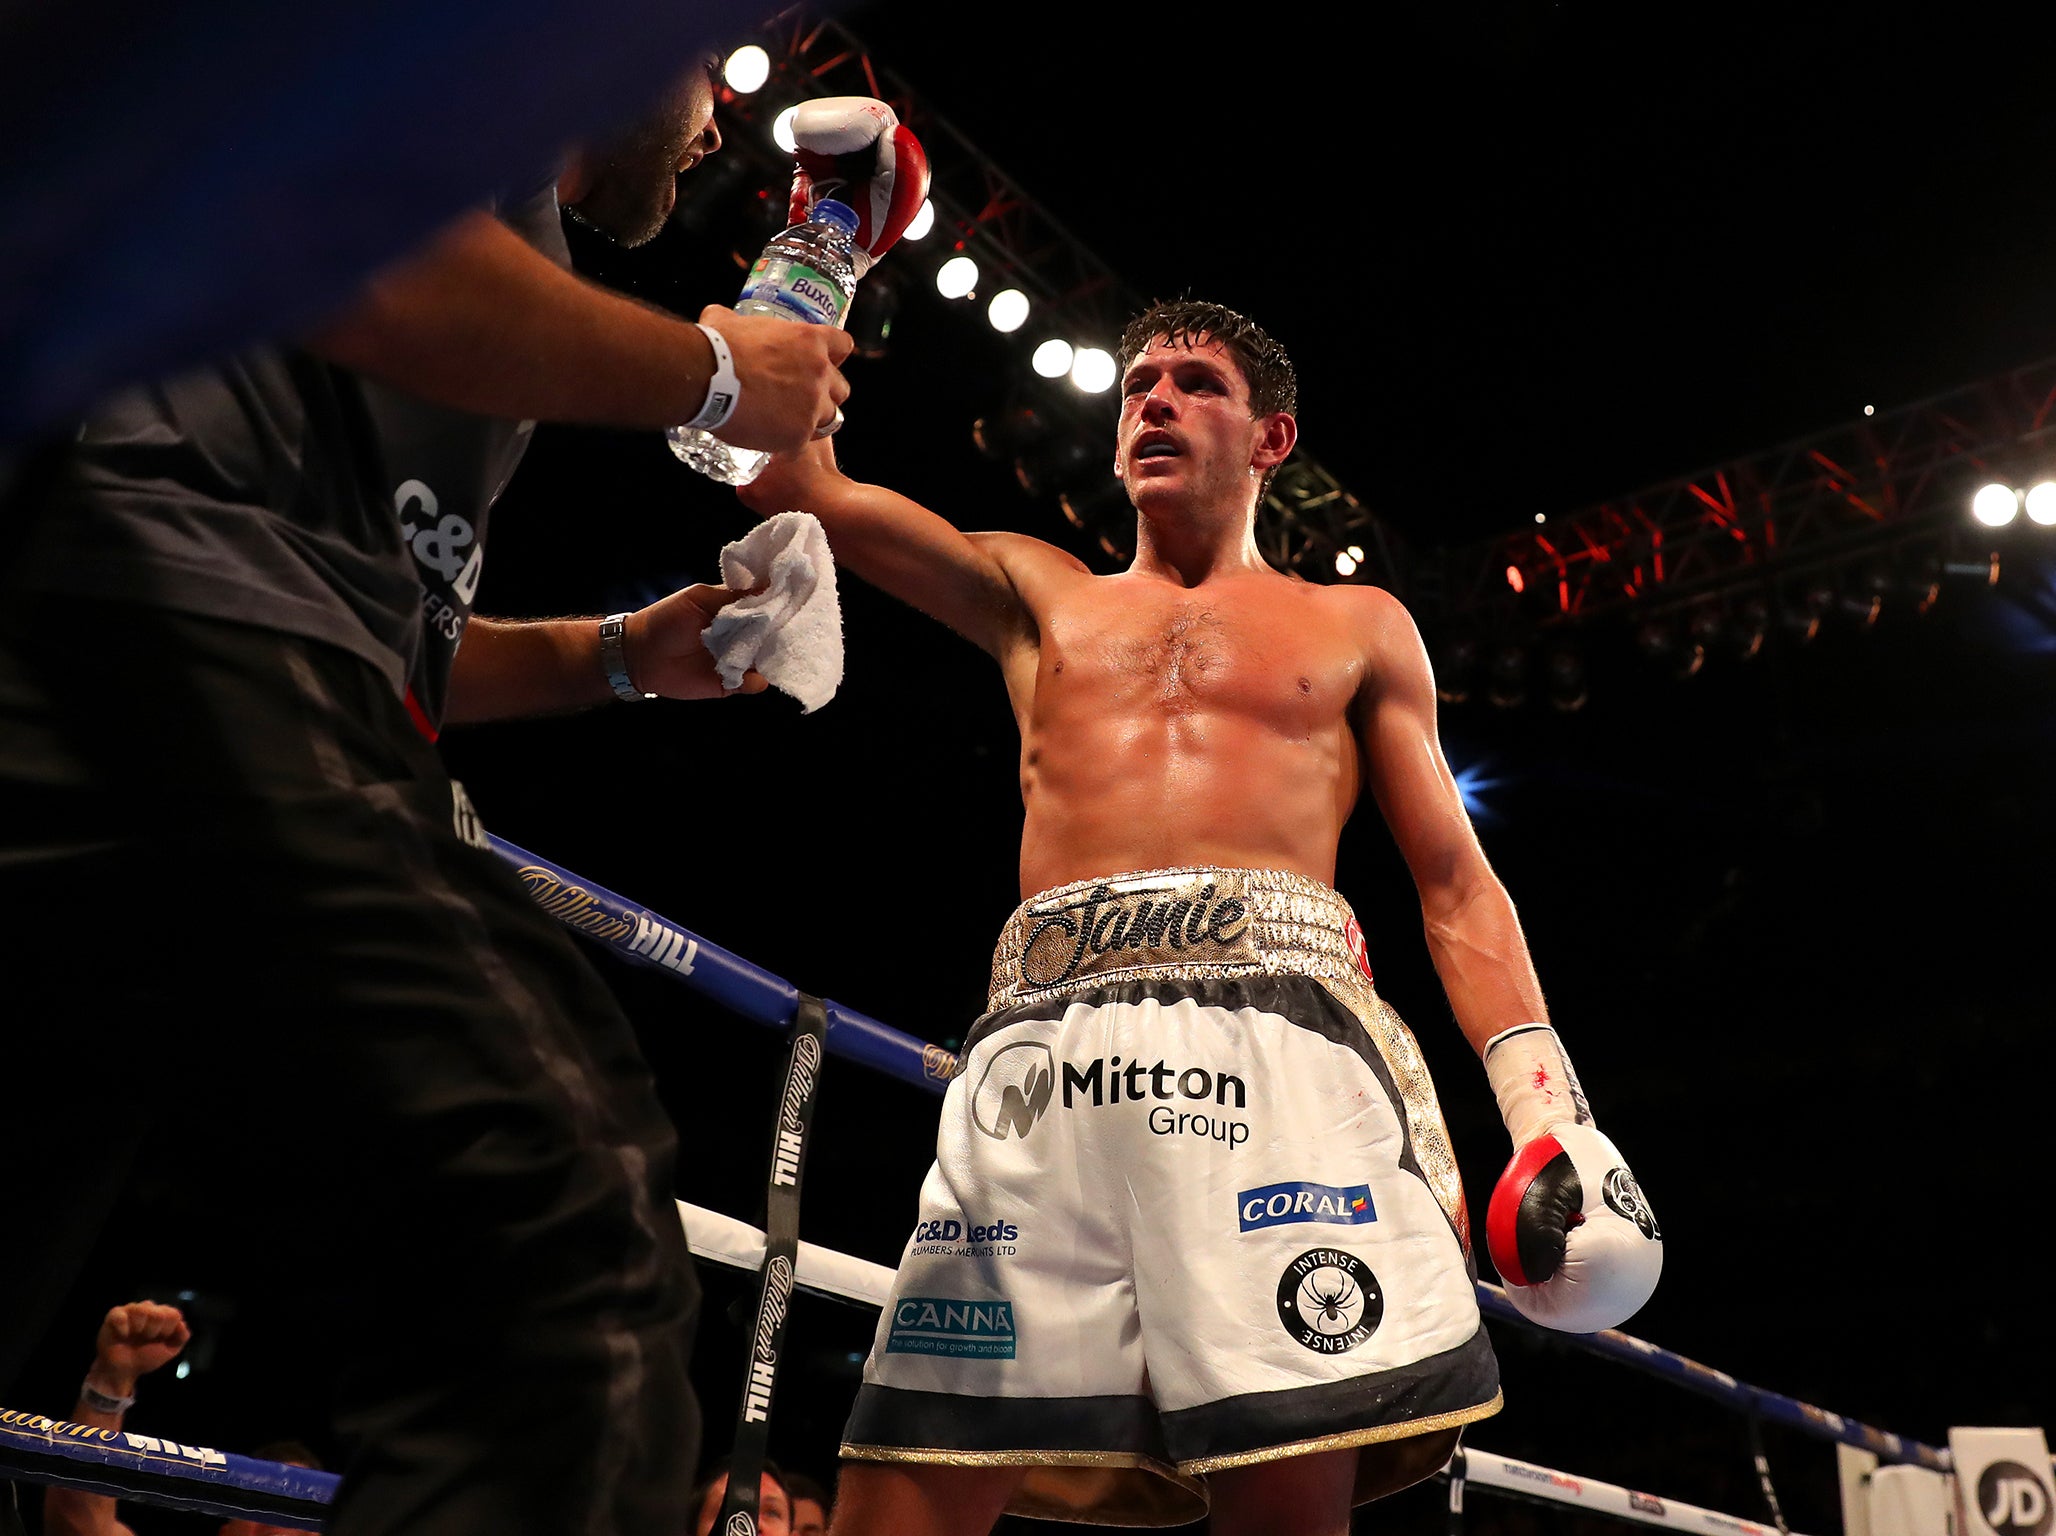 McDonnell earned a controversial points verdict when he first fought Solis